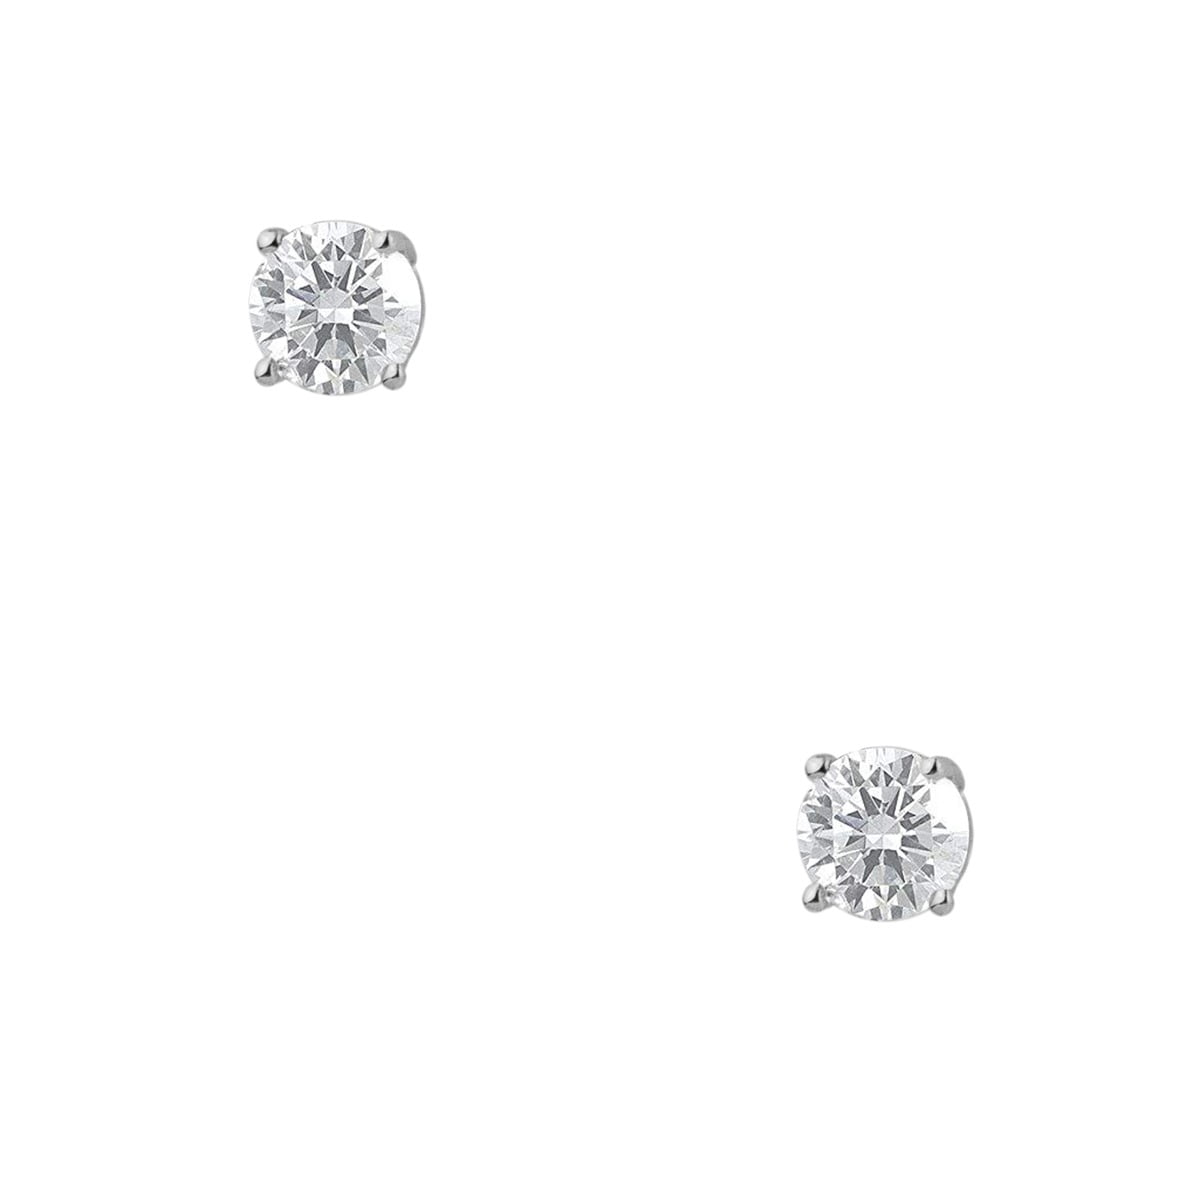 Stud earrings with round cubic zirconia of diameter 5 mm, made of platinum plated silver 925°.